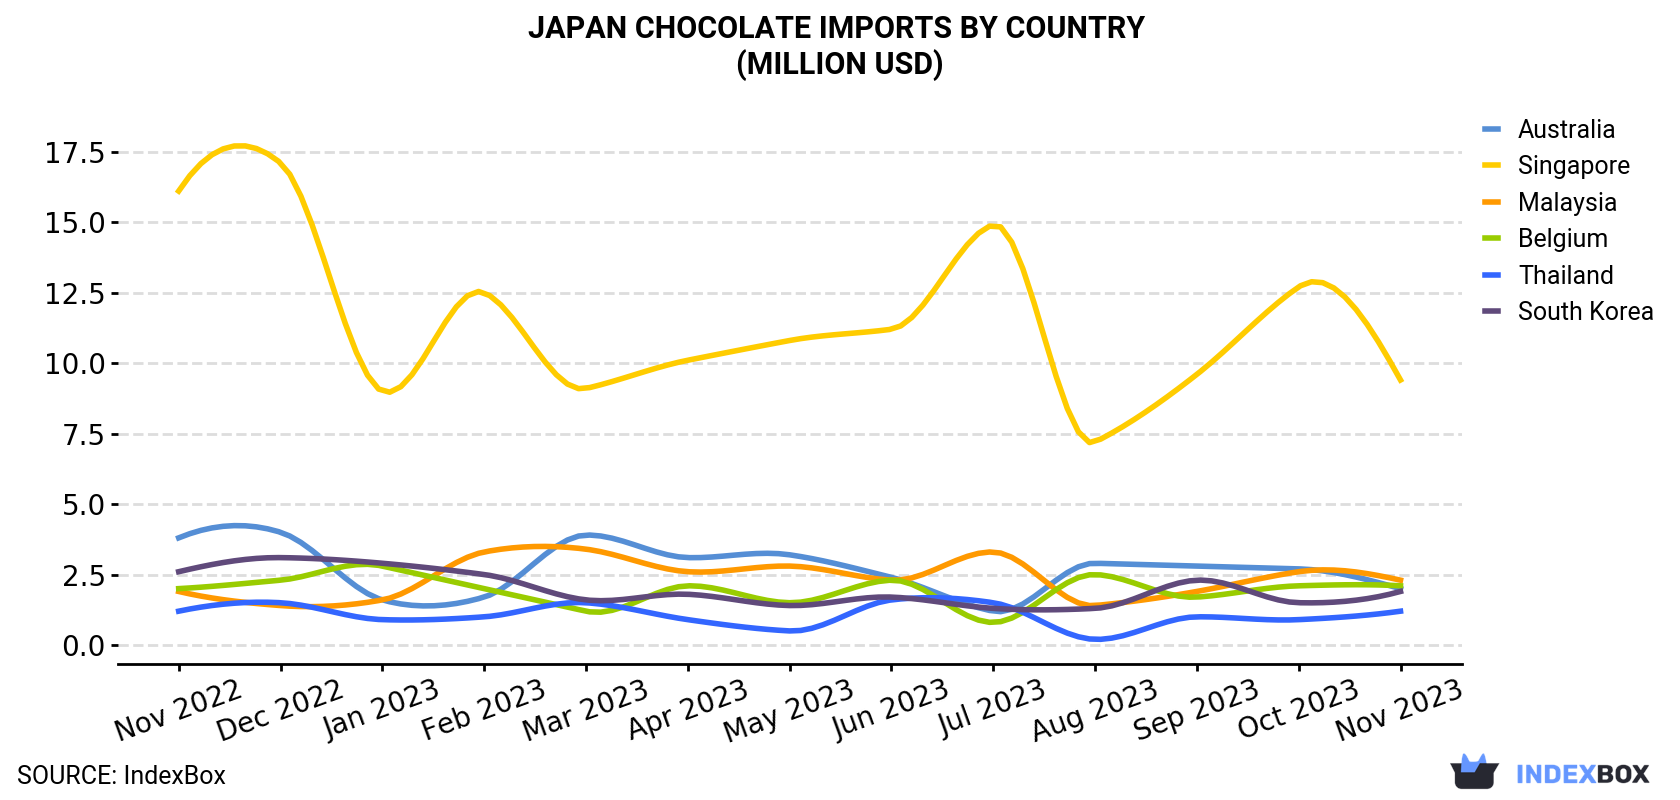 Japan Chocolate Imports By Country (Million USD)